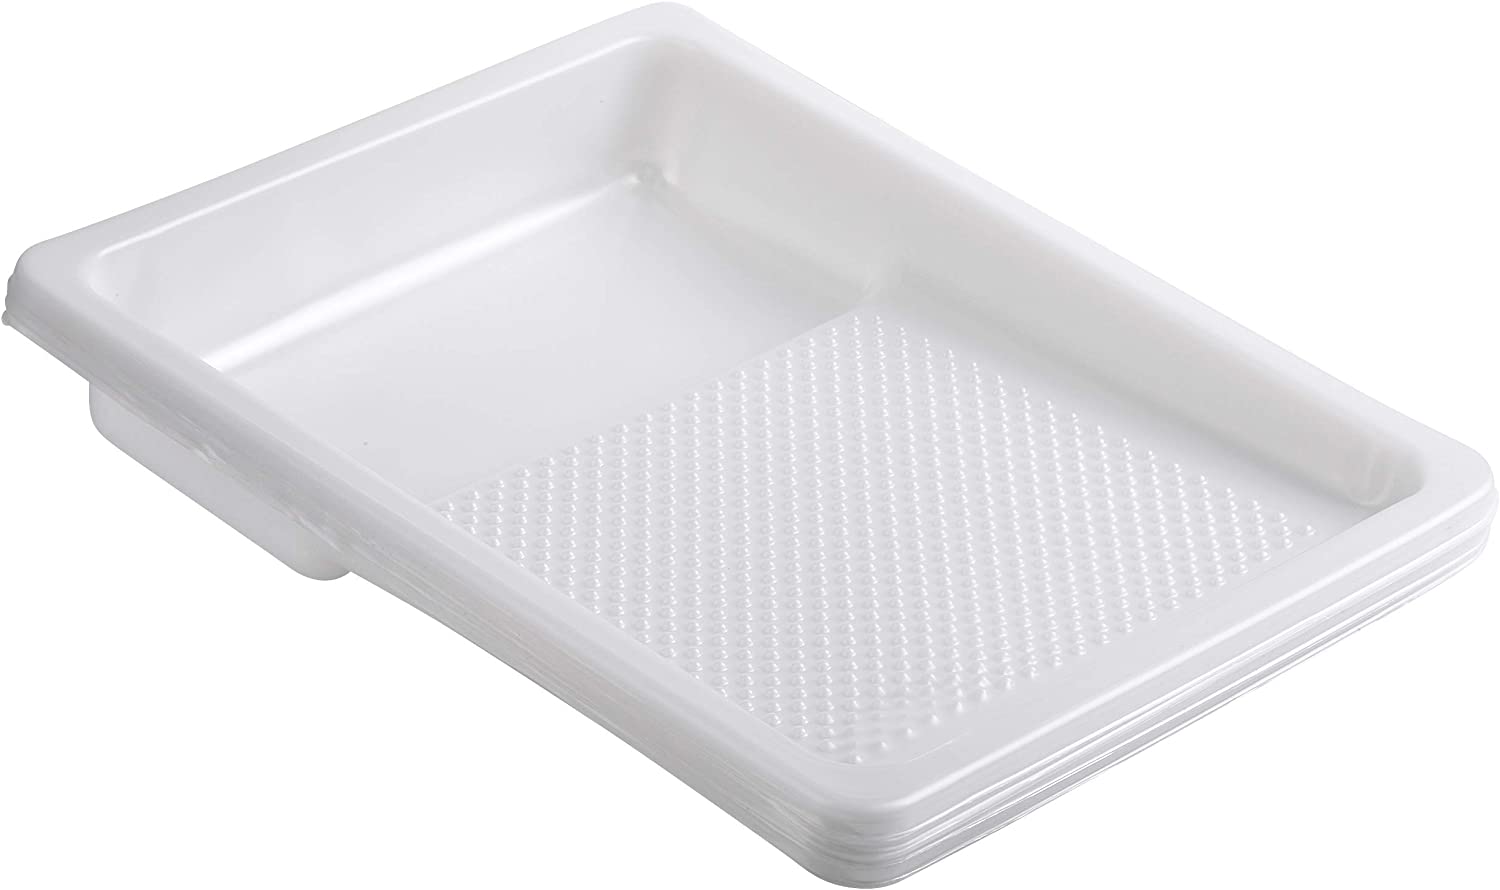 Bates- Paint Tray Liner, 9 Inch, 10 Pack, Paint Roller Tray, Paint